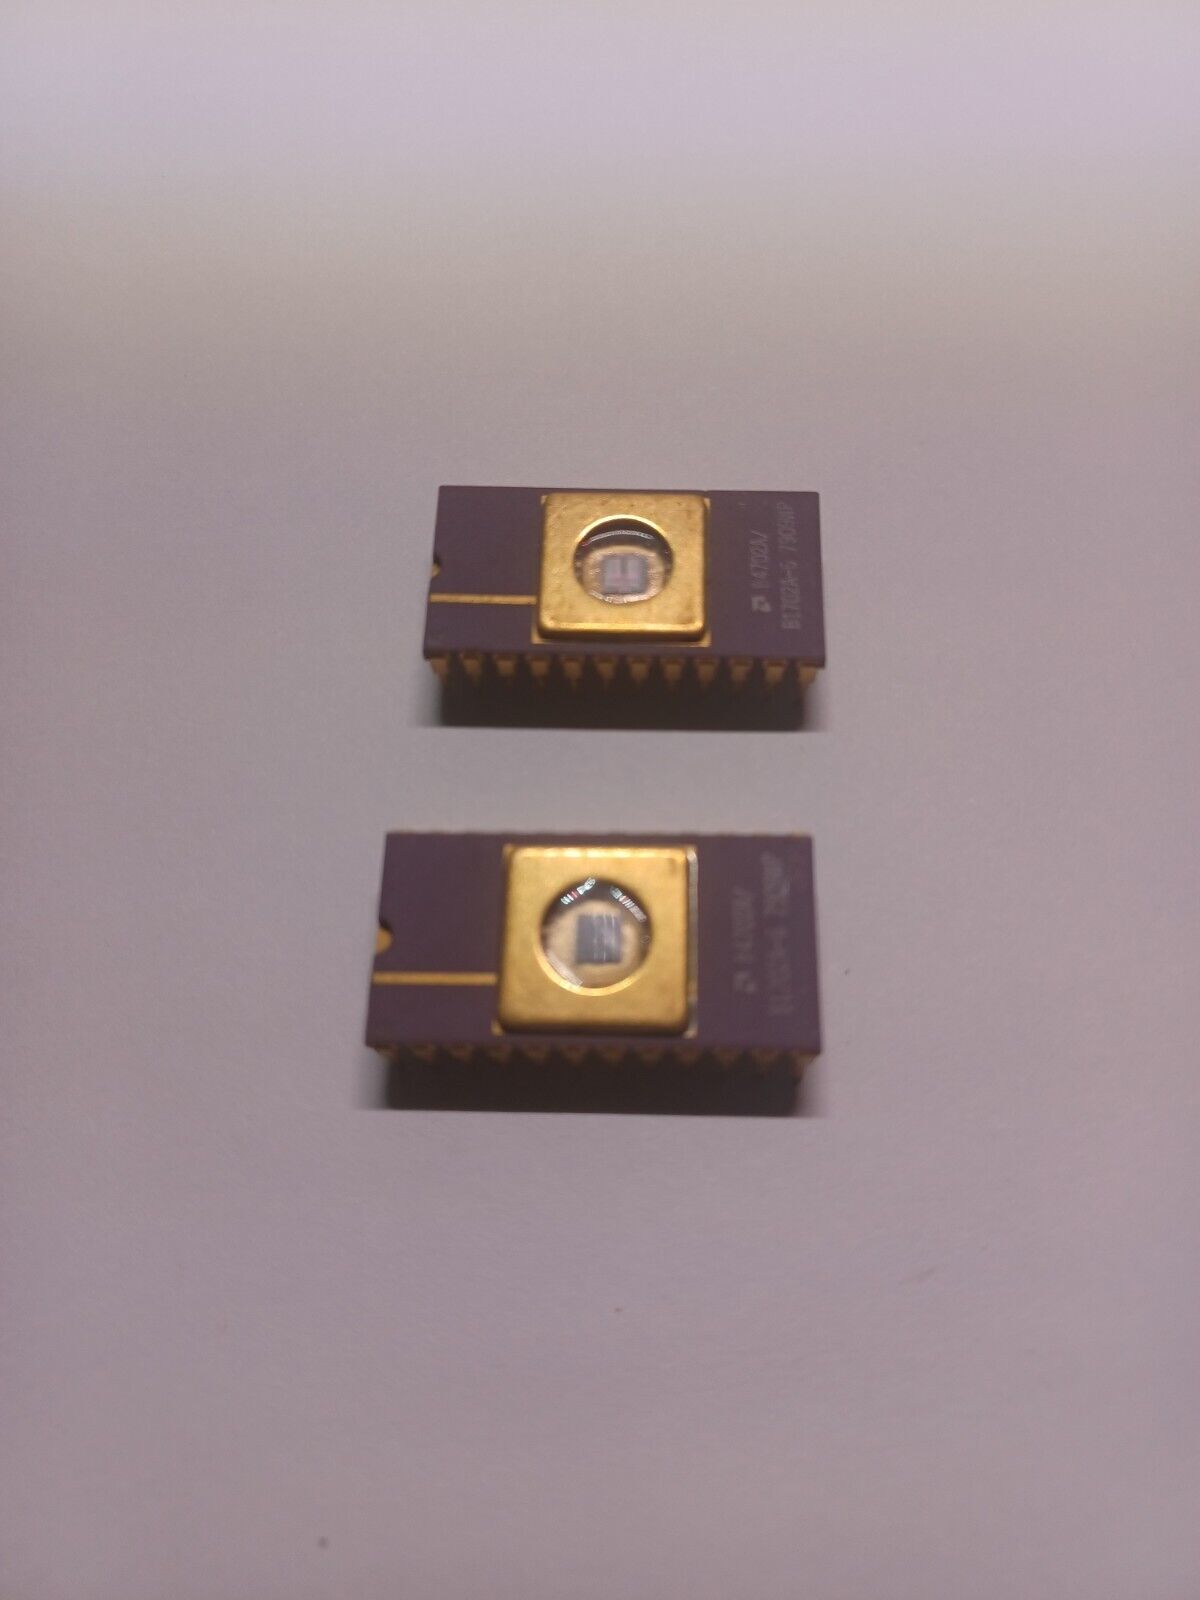 (2pcs) AMD IC CHIPS Vintage 24 pin EPROM Ceramic Gold collectible B4702A